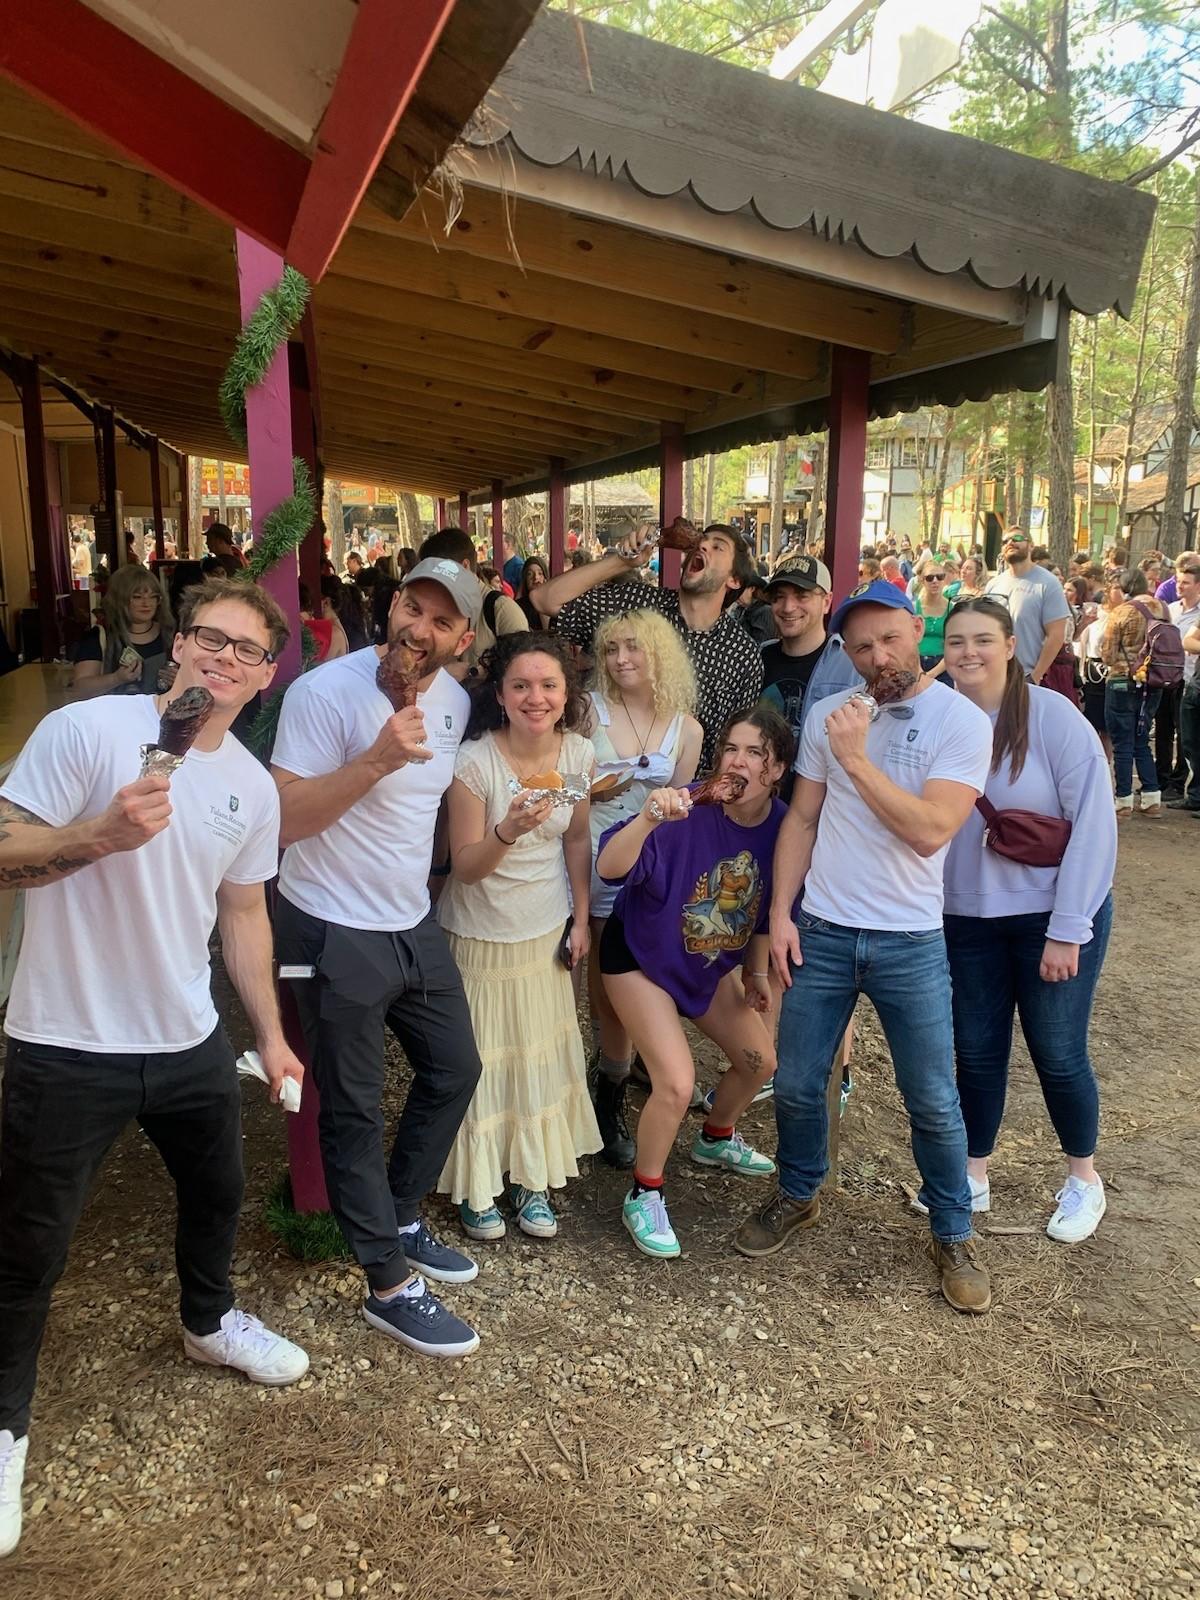 Group photo of TRC members at the 2023 Renaissance Festival